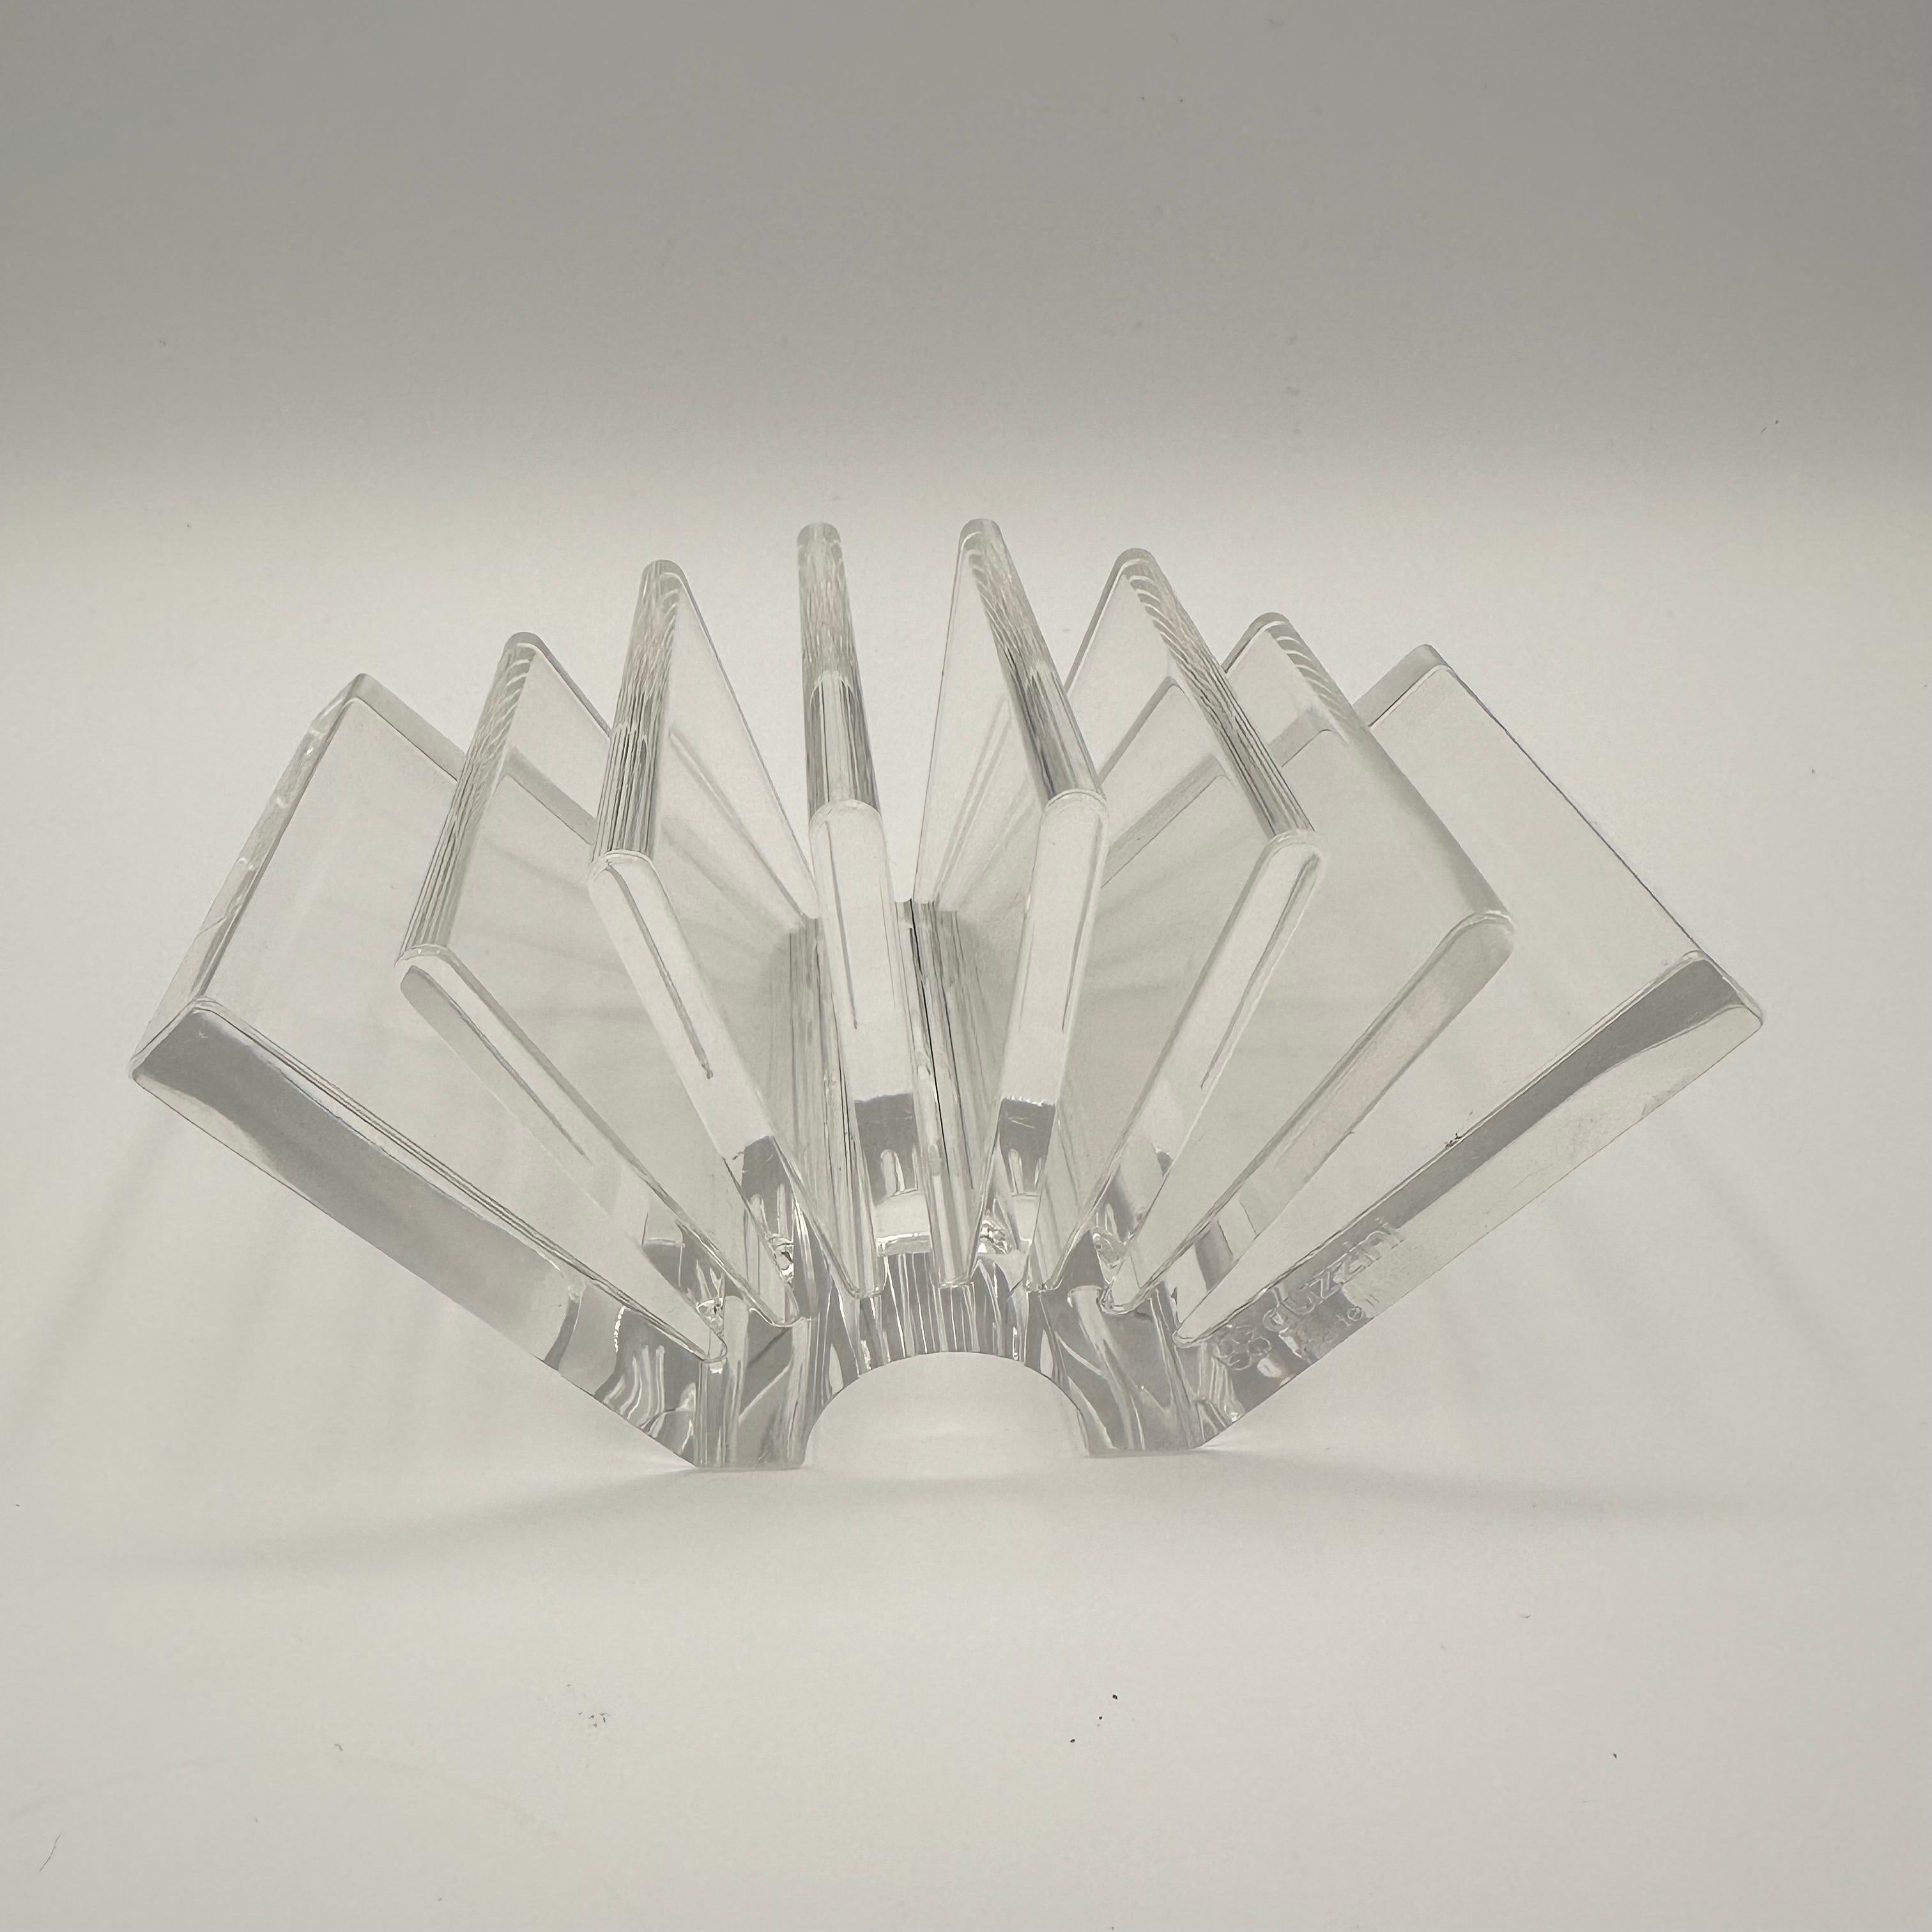 Post-Modern Vintage Clear Lucite Fan Shaped Card Holder by Guzzini 1980s Made in Italy For Sale